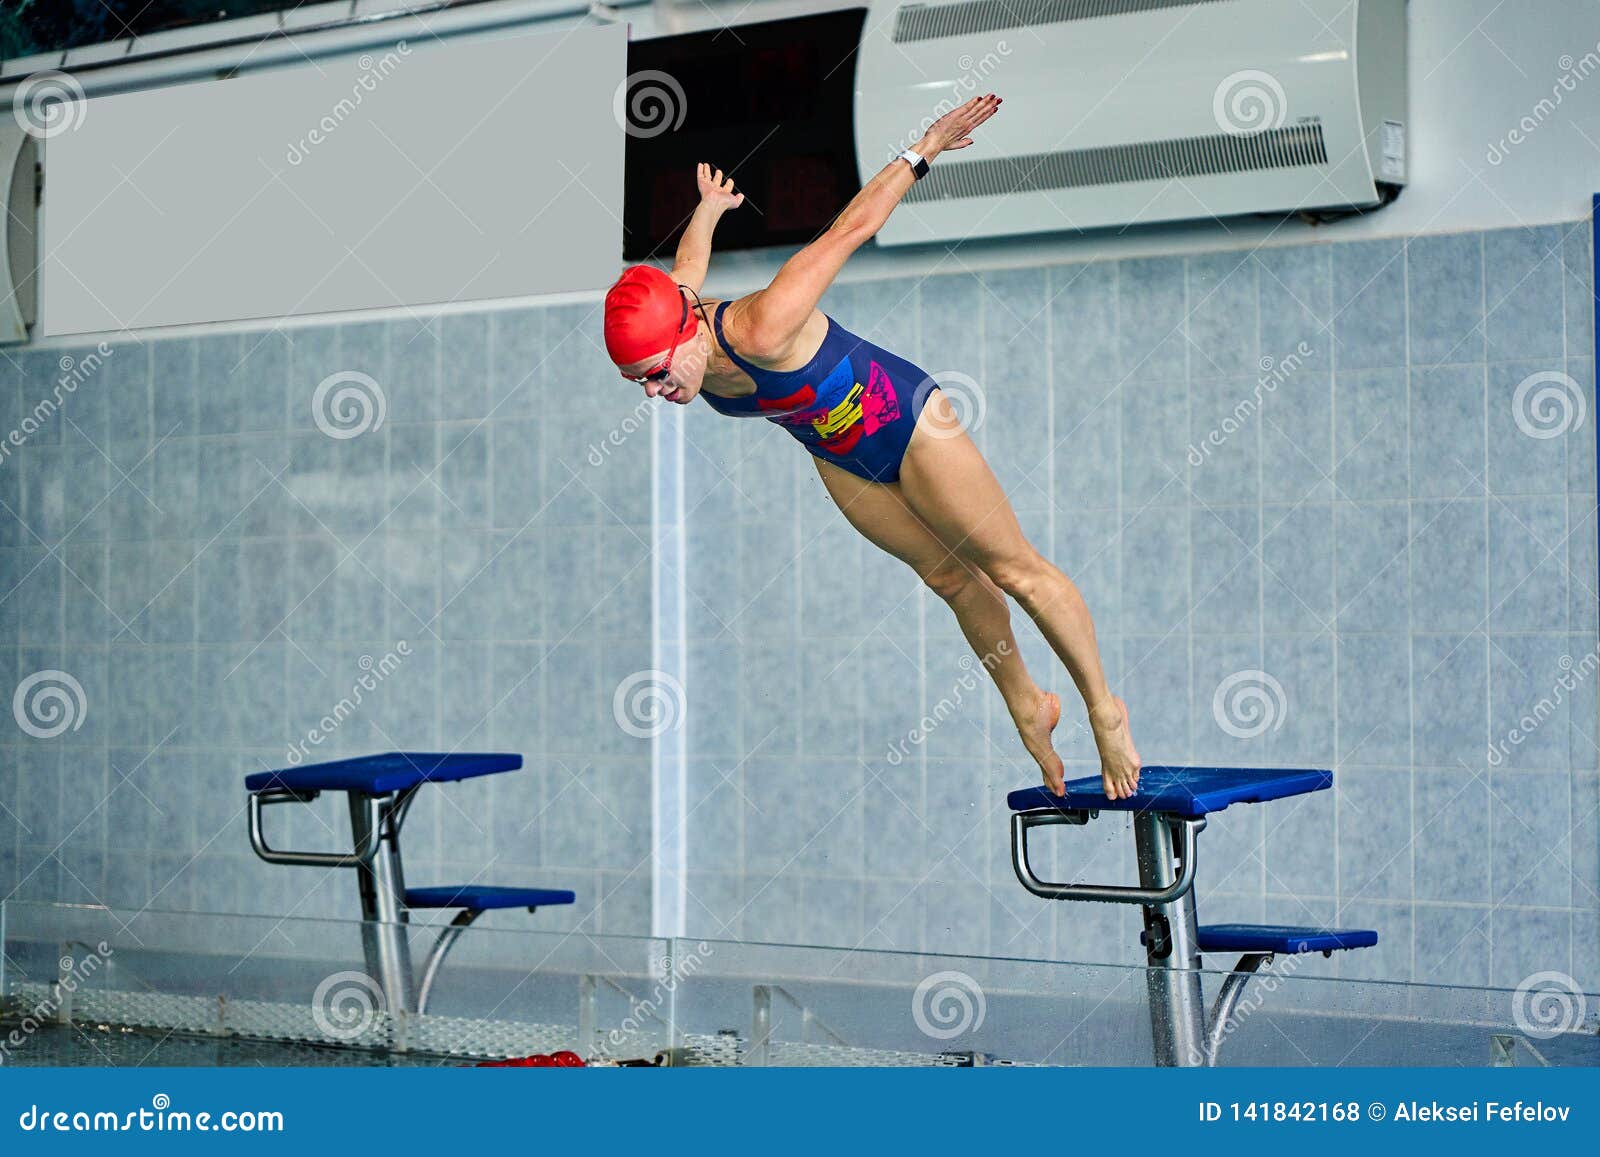 female athlete jumps to the pool water. middle-aged woman professionally engaged in swimming